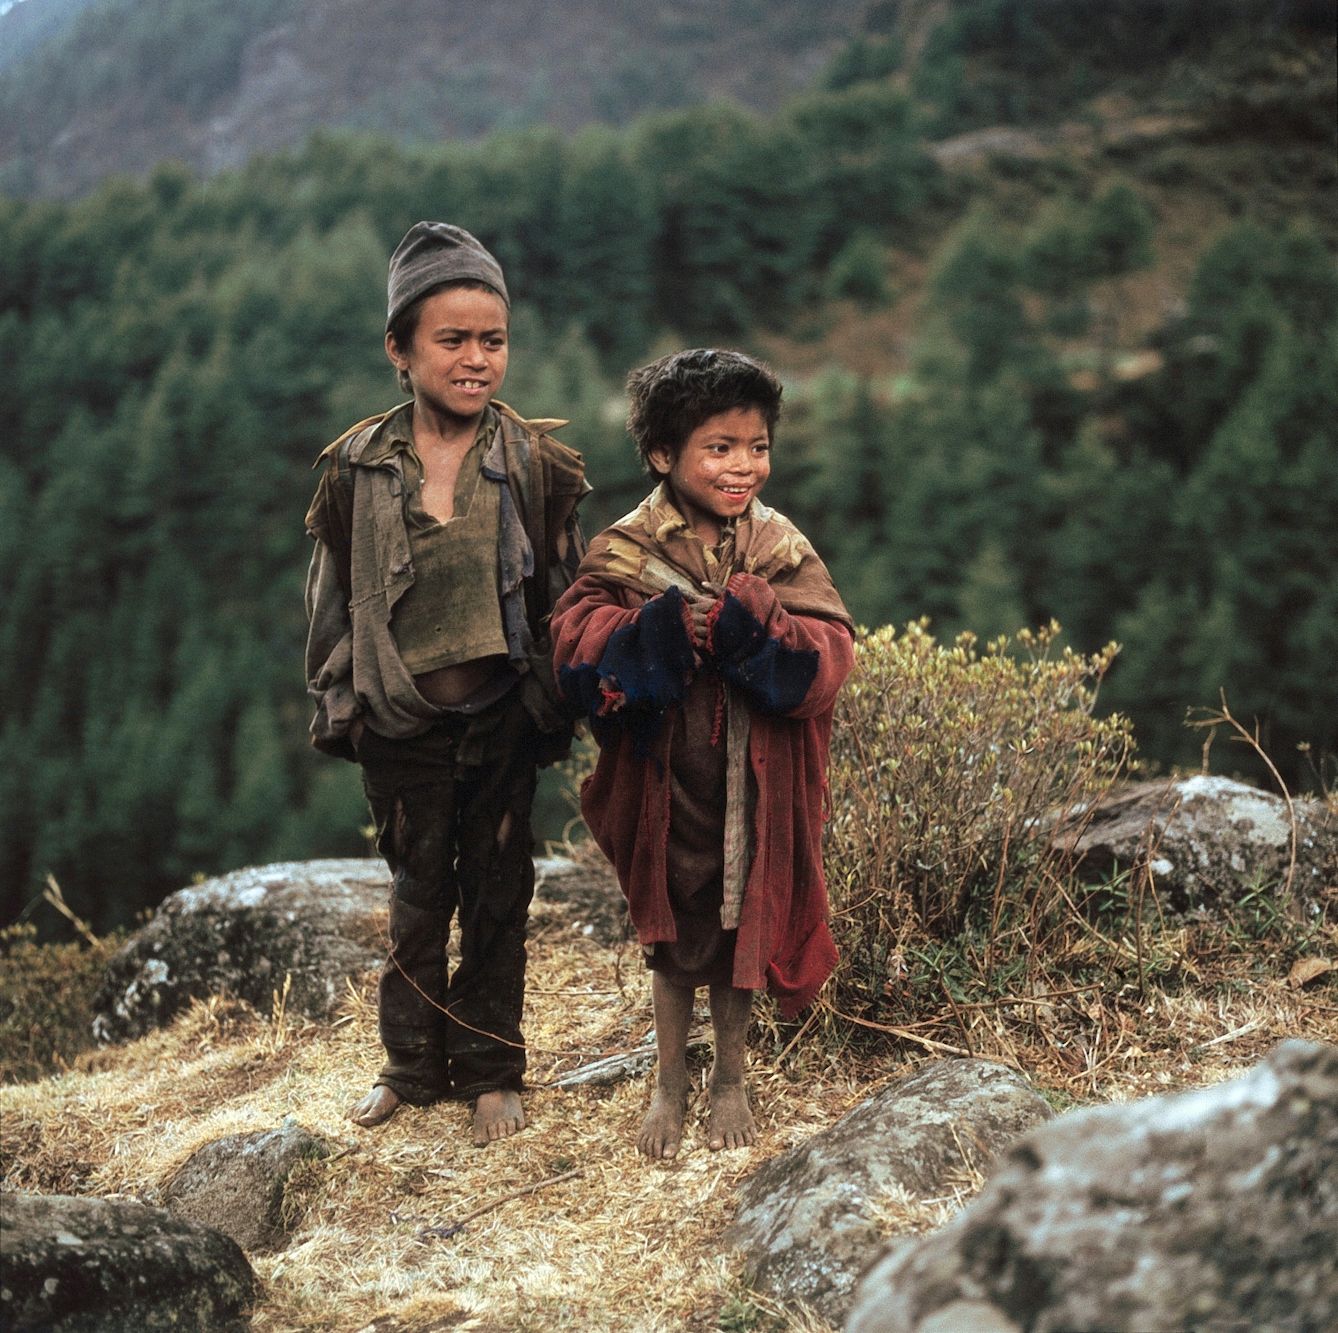 Two young children standing on a hillside smiling